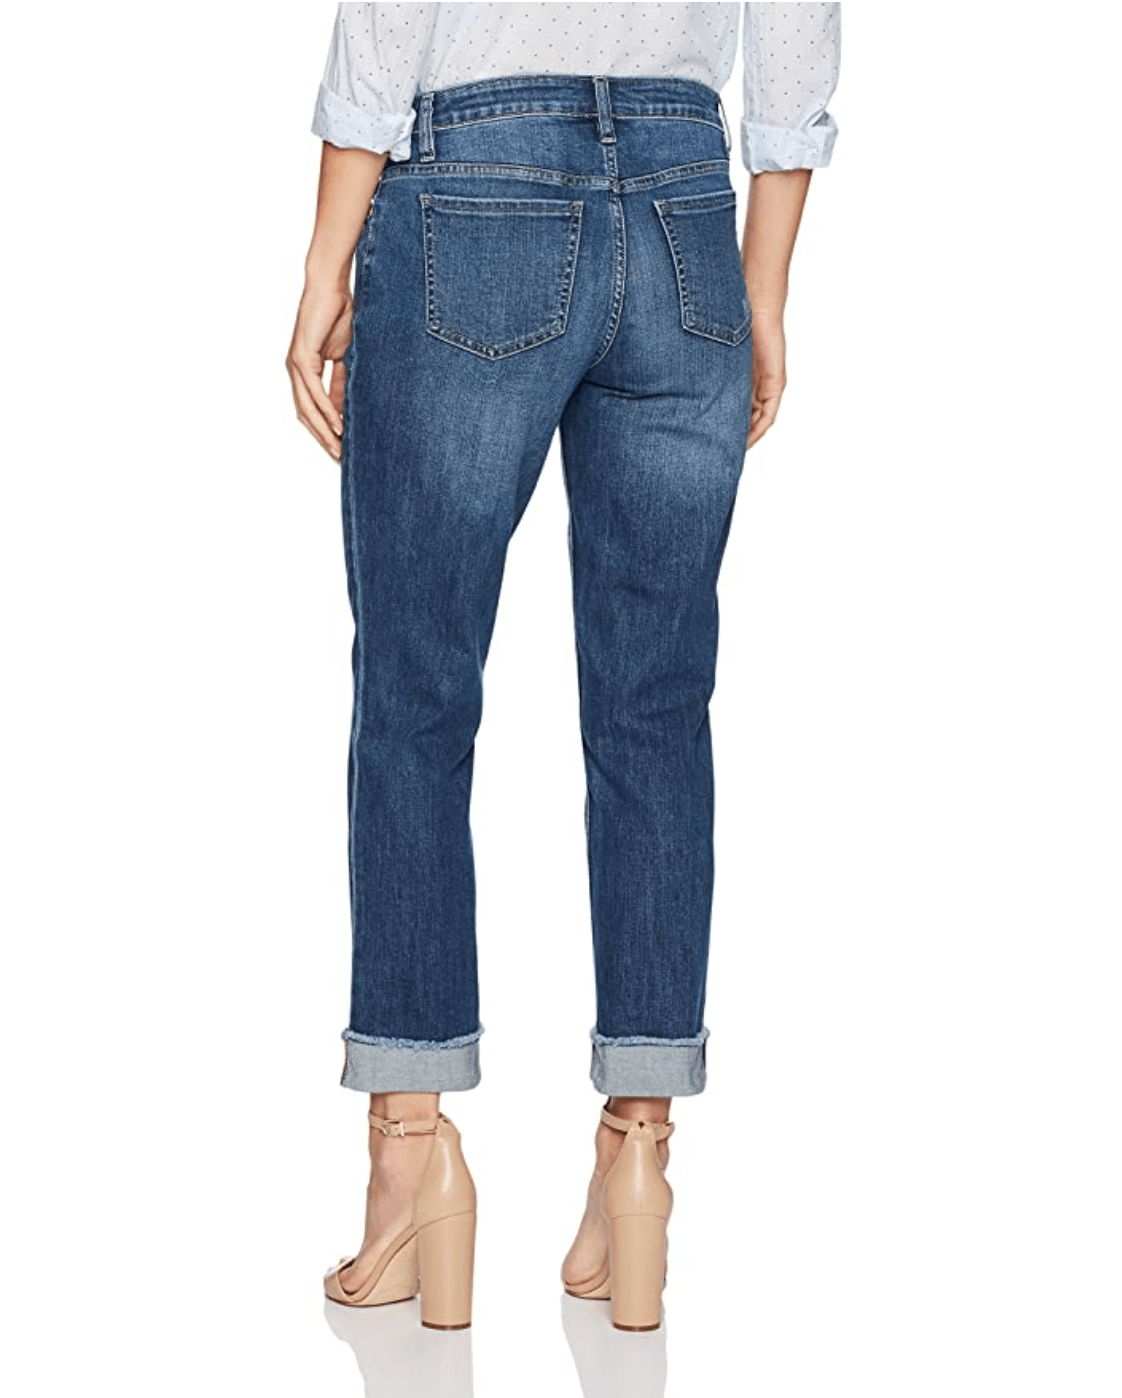 Lee Boyfriend Jeans From Amazon Are a Must-Have for Spring